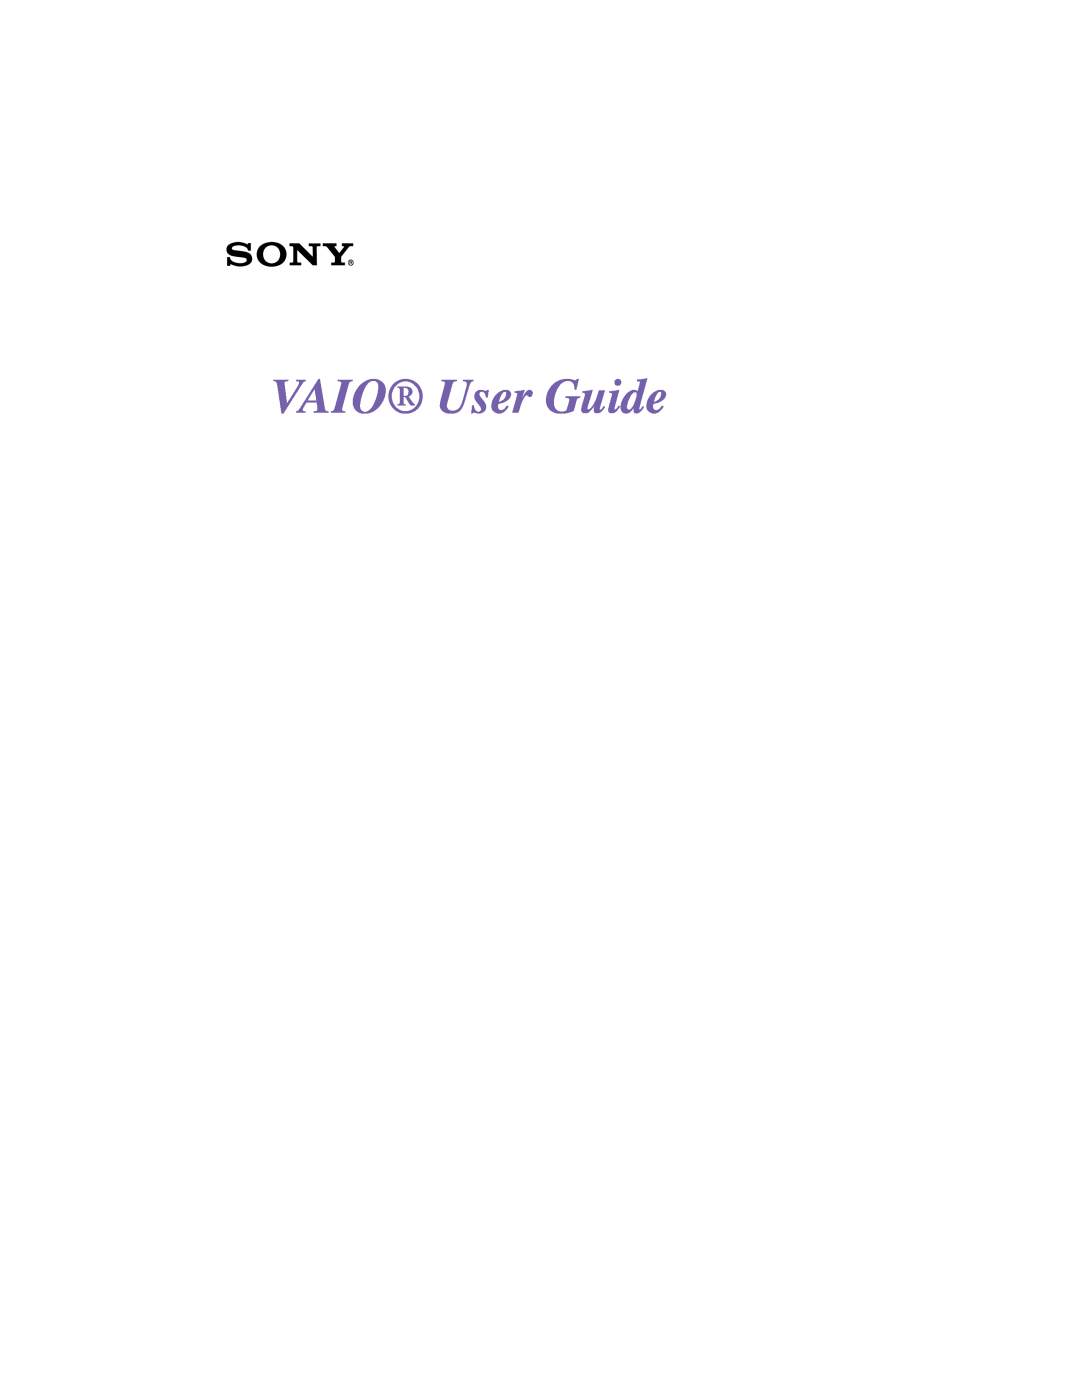 Sony manual VAIO User Guide 